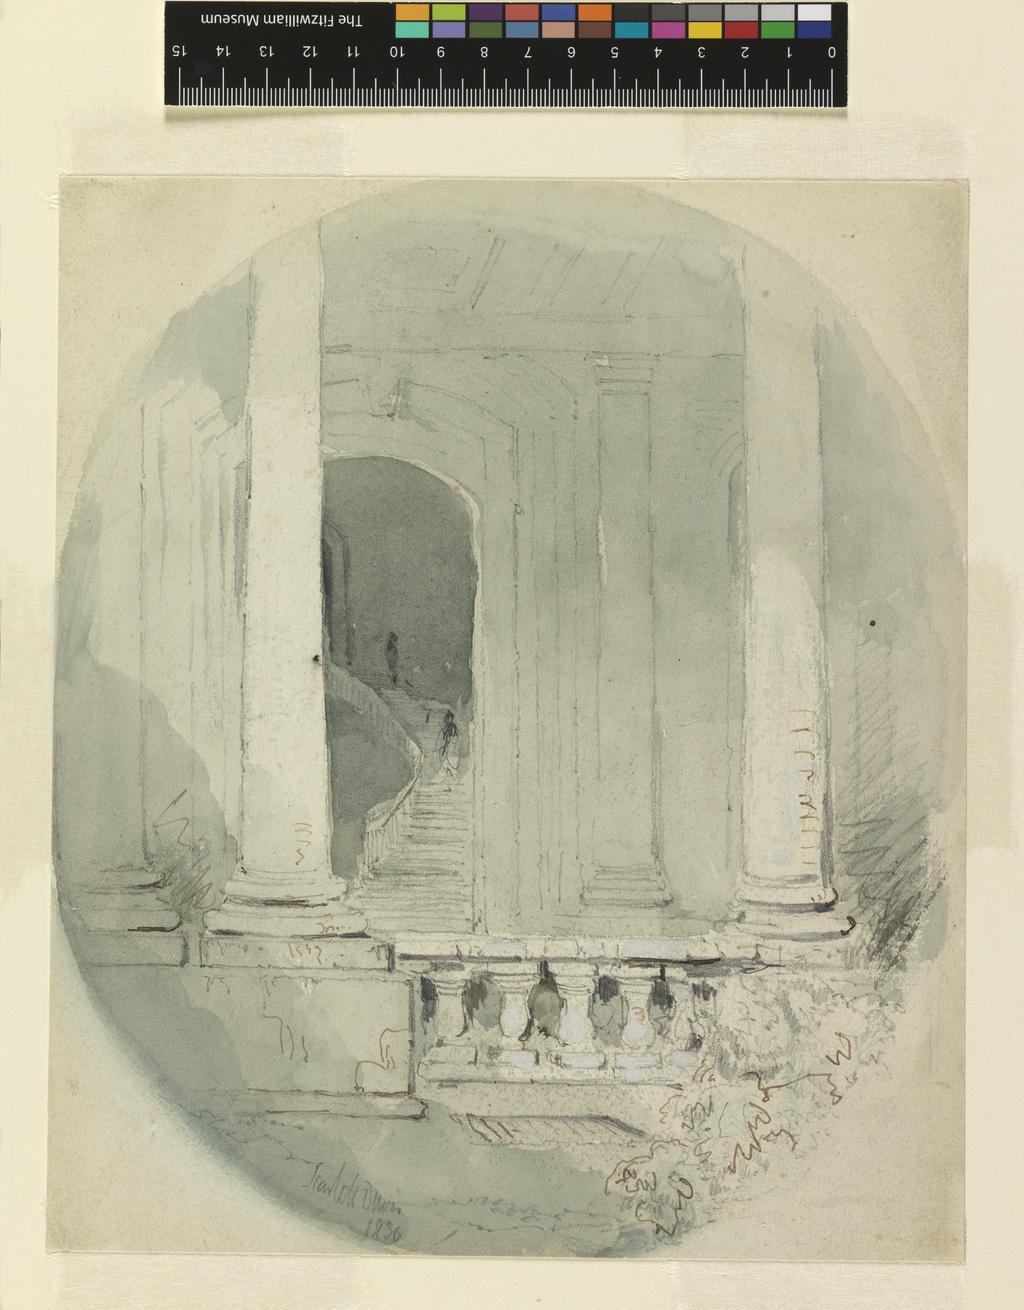 An image of A staircase at Greenwich Hospital - a vignette. Davis, John Scarlett (British, 1804-1845). Graphite, pen and ink, pale green wash heightened with white on paper, 1836. Acquisition Credit: Sir Ivor and Lady Batchelor Bequest.